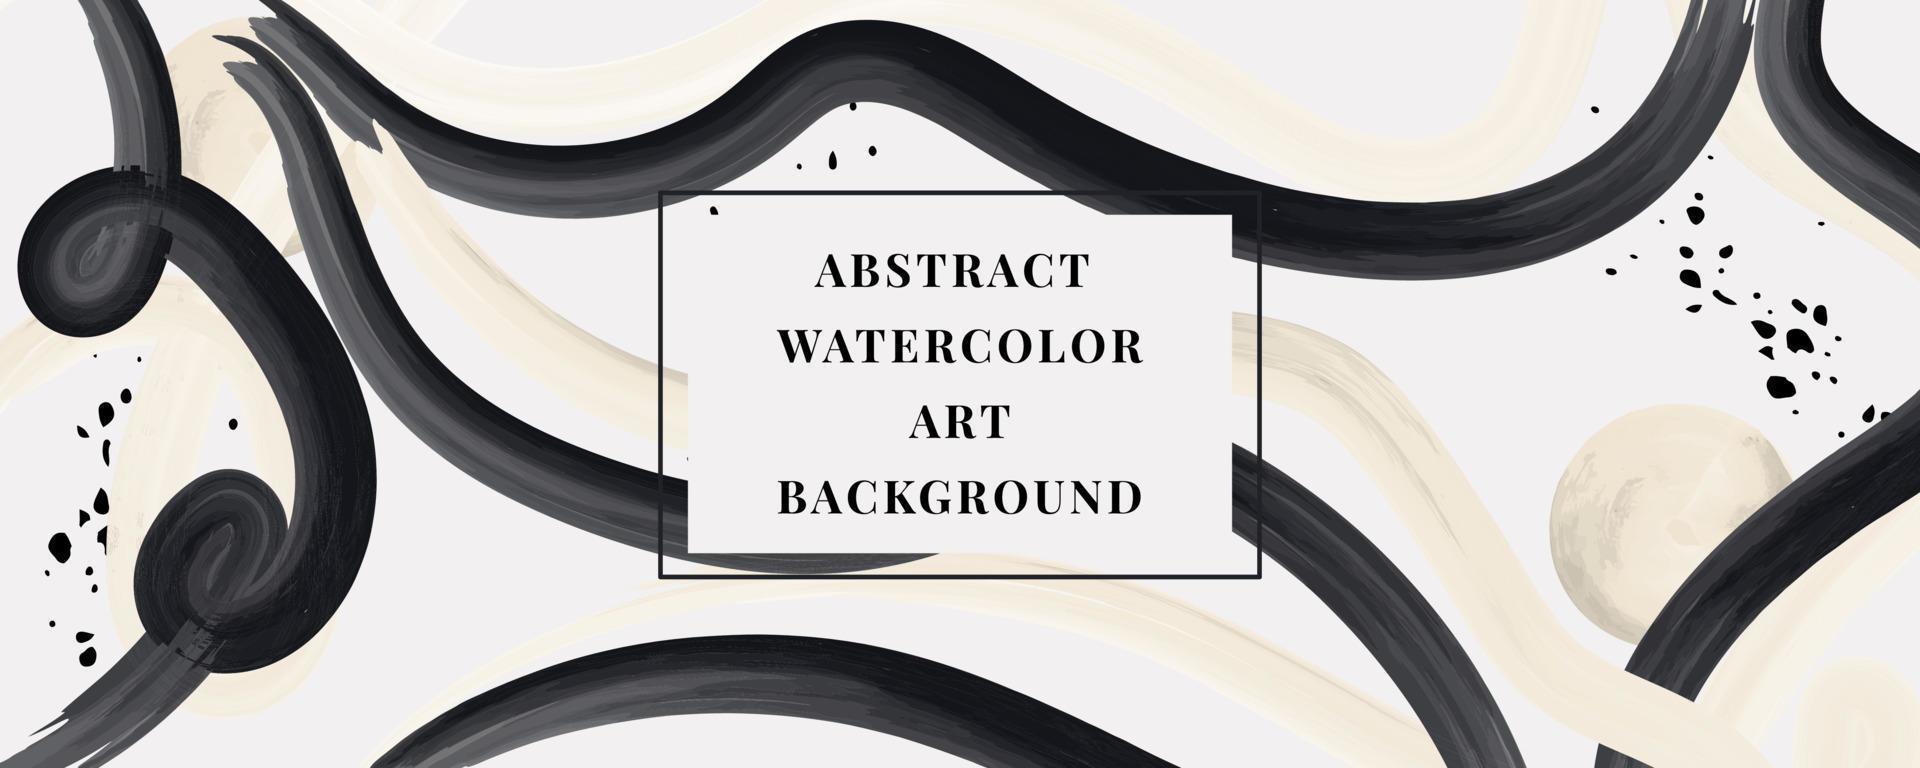 Vector background of watercolor art. Wallpaper design with a brush. black, white brushes, abstract shapes. watercolor illustration for prints, wall drawings, covers and invitation cards